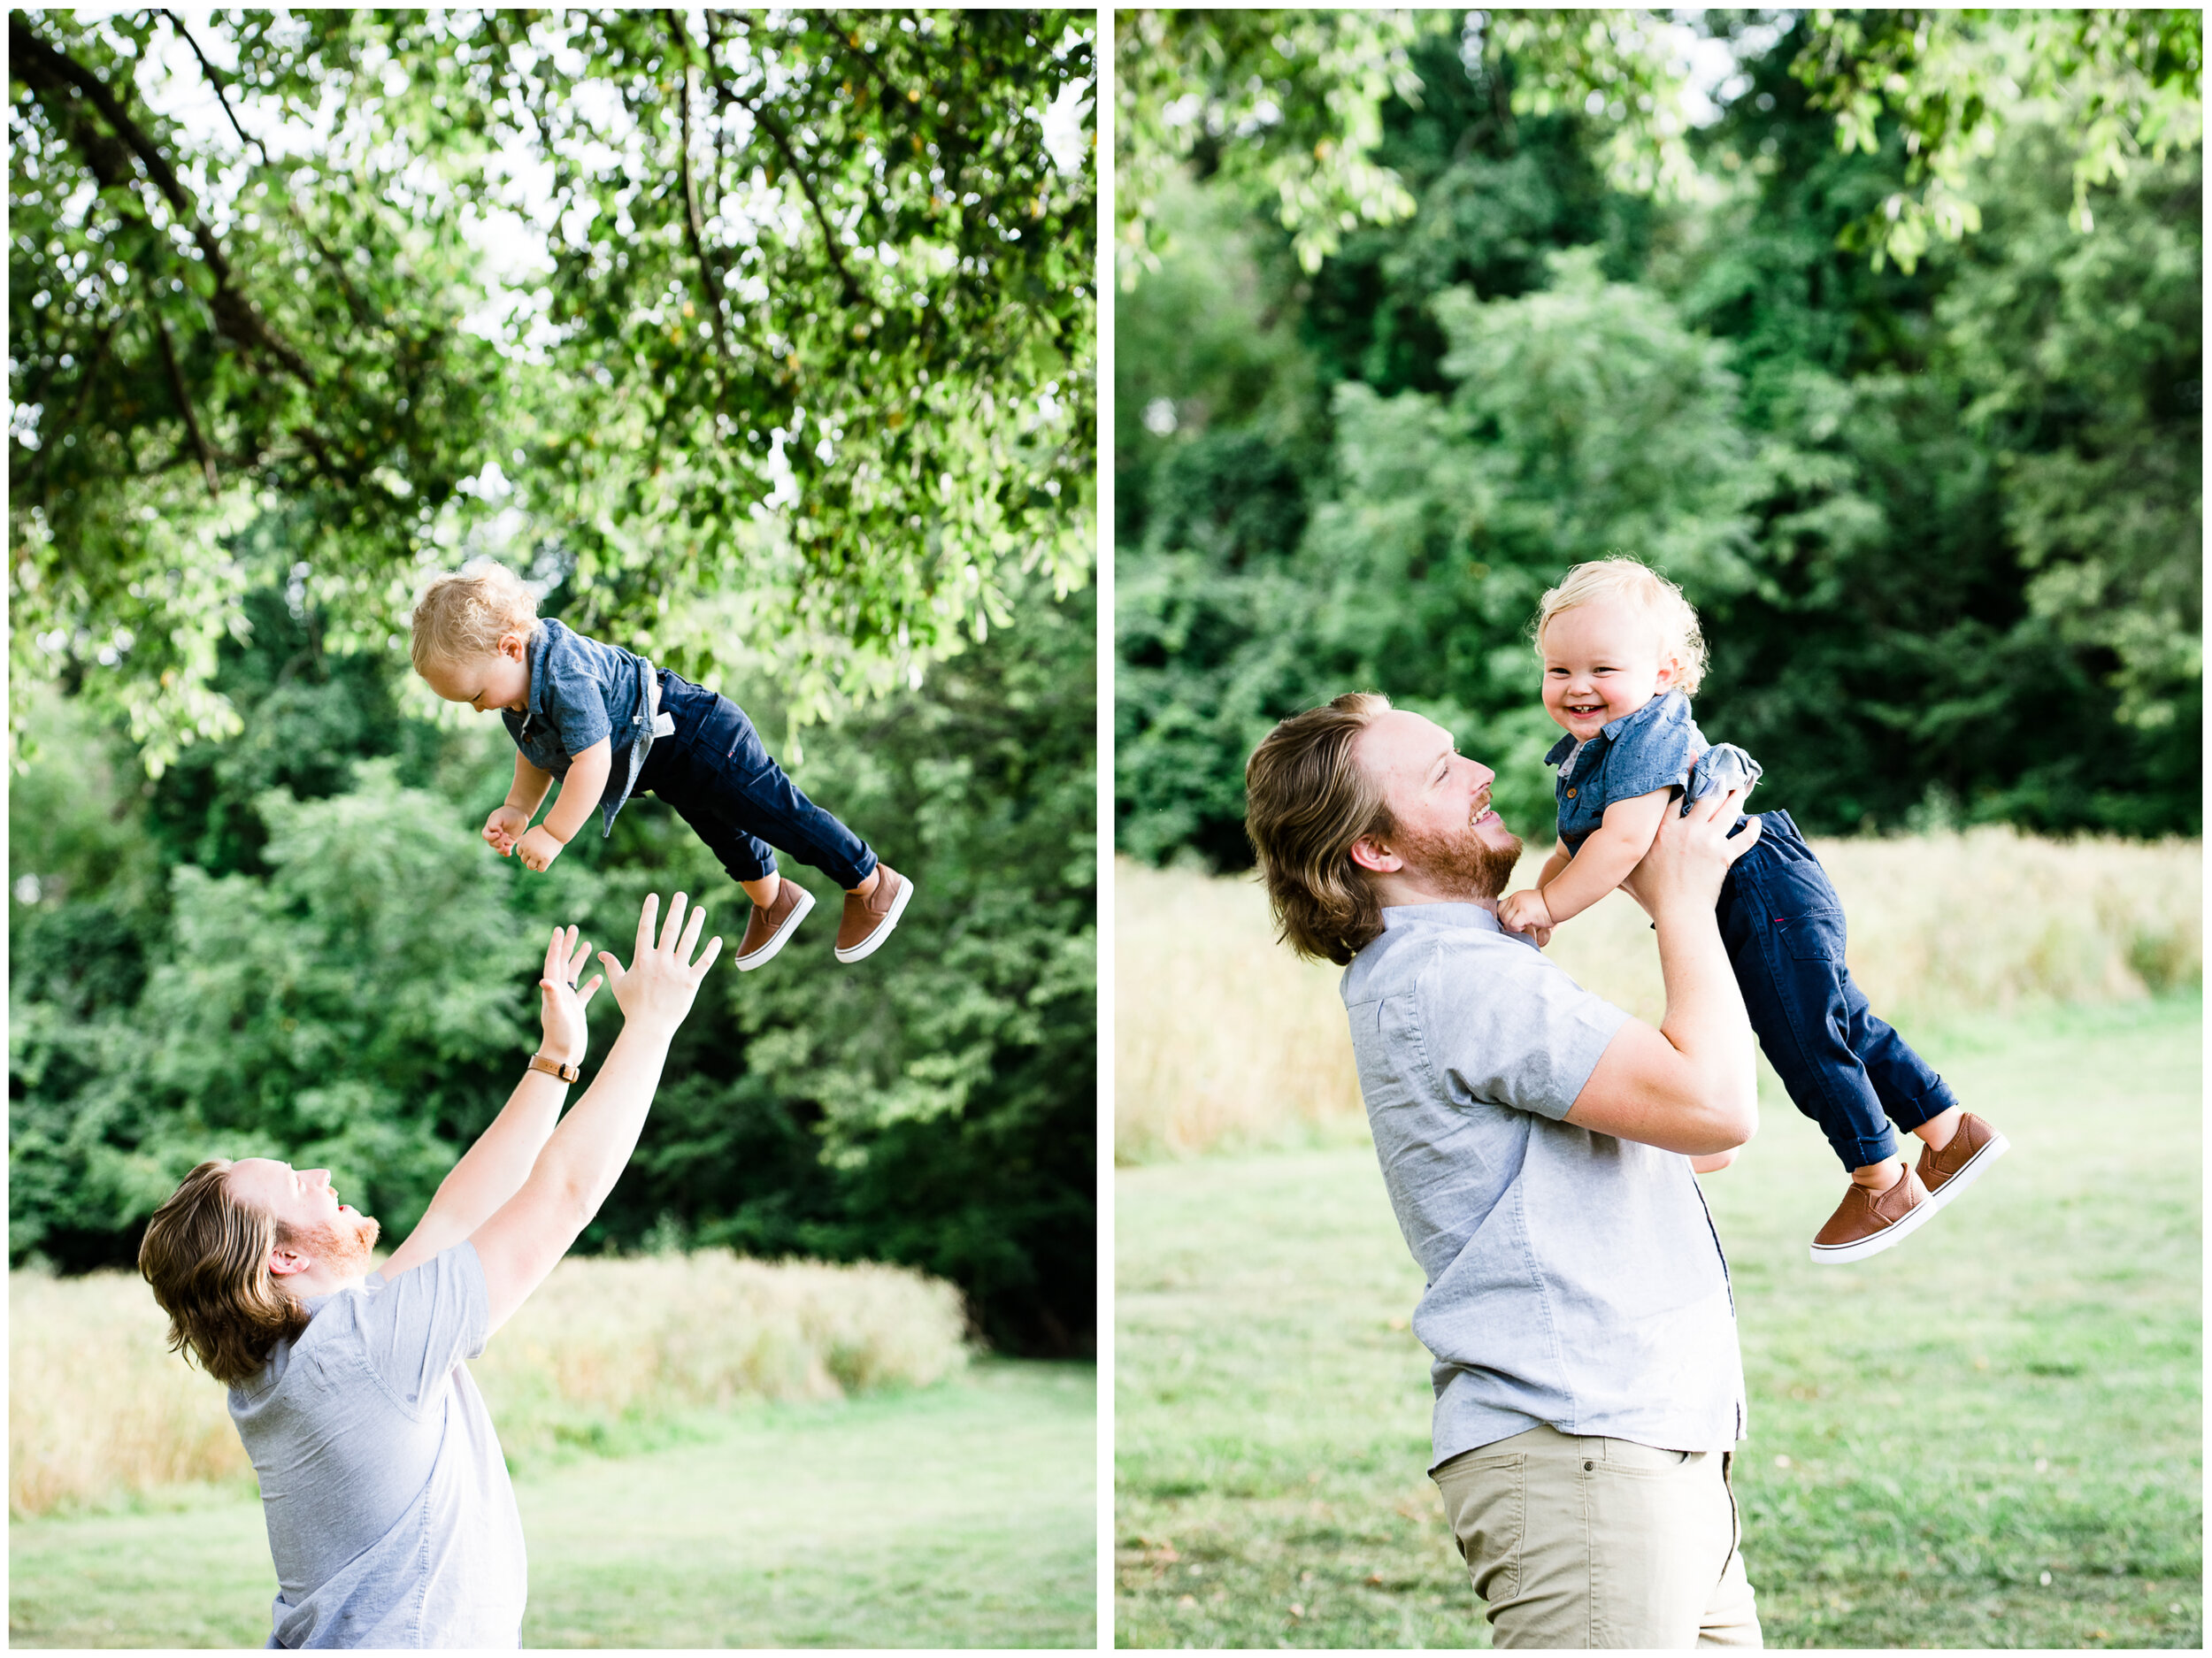 Pittsburgh Family Photography, Lifestyle Portrait Session, Mariah Fisher Photography.jpg